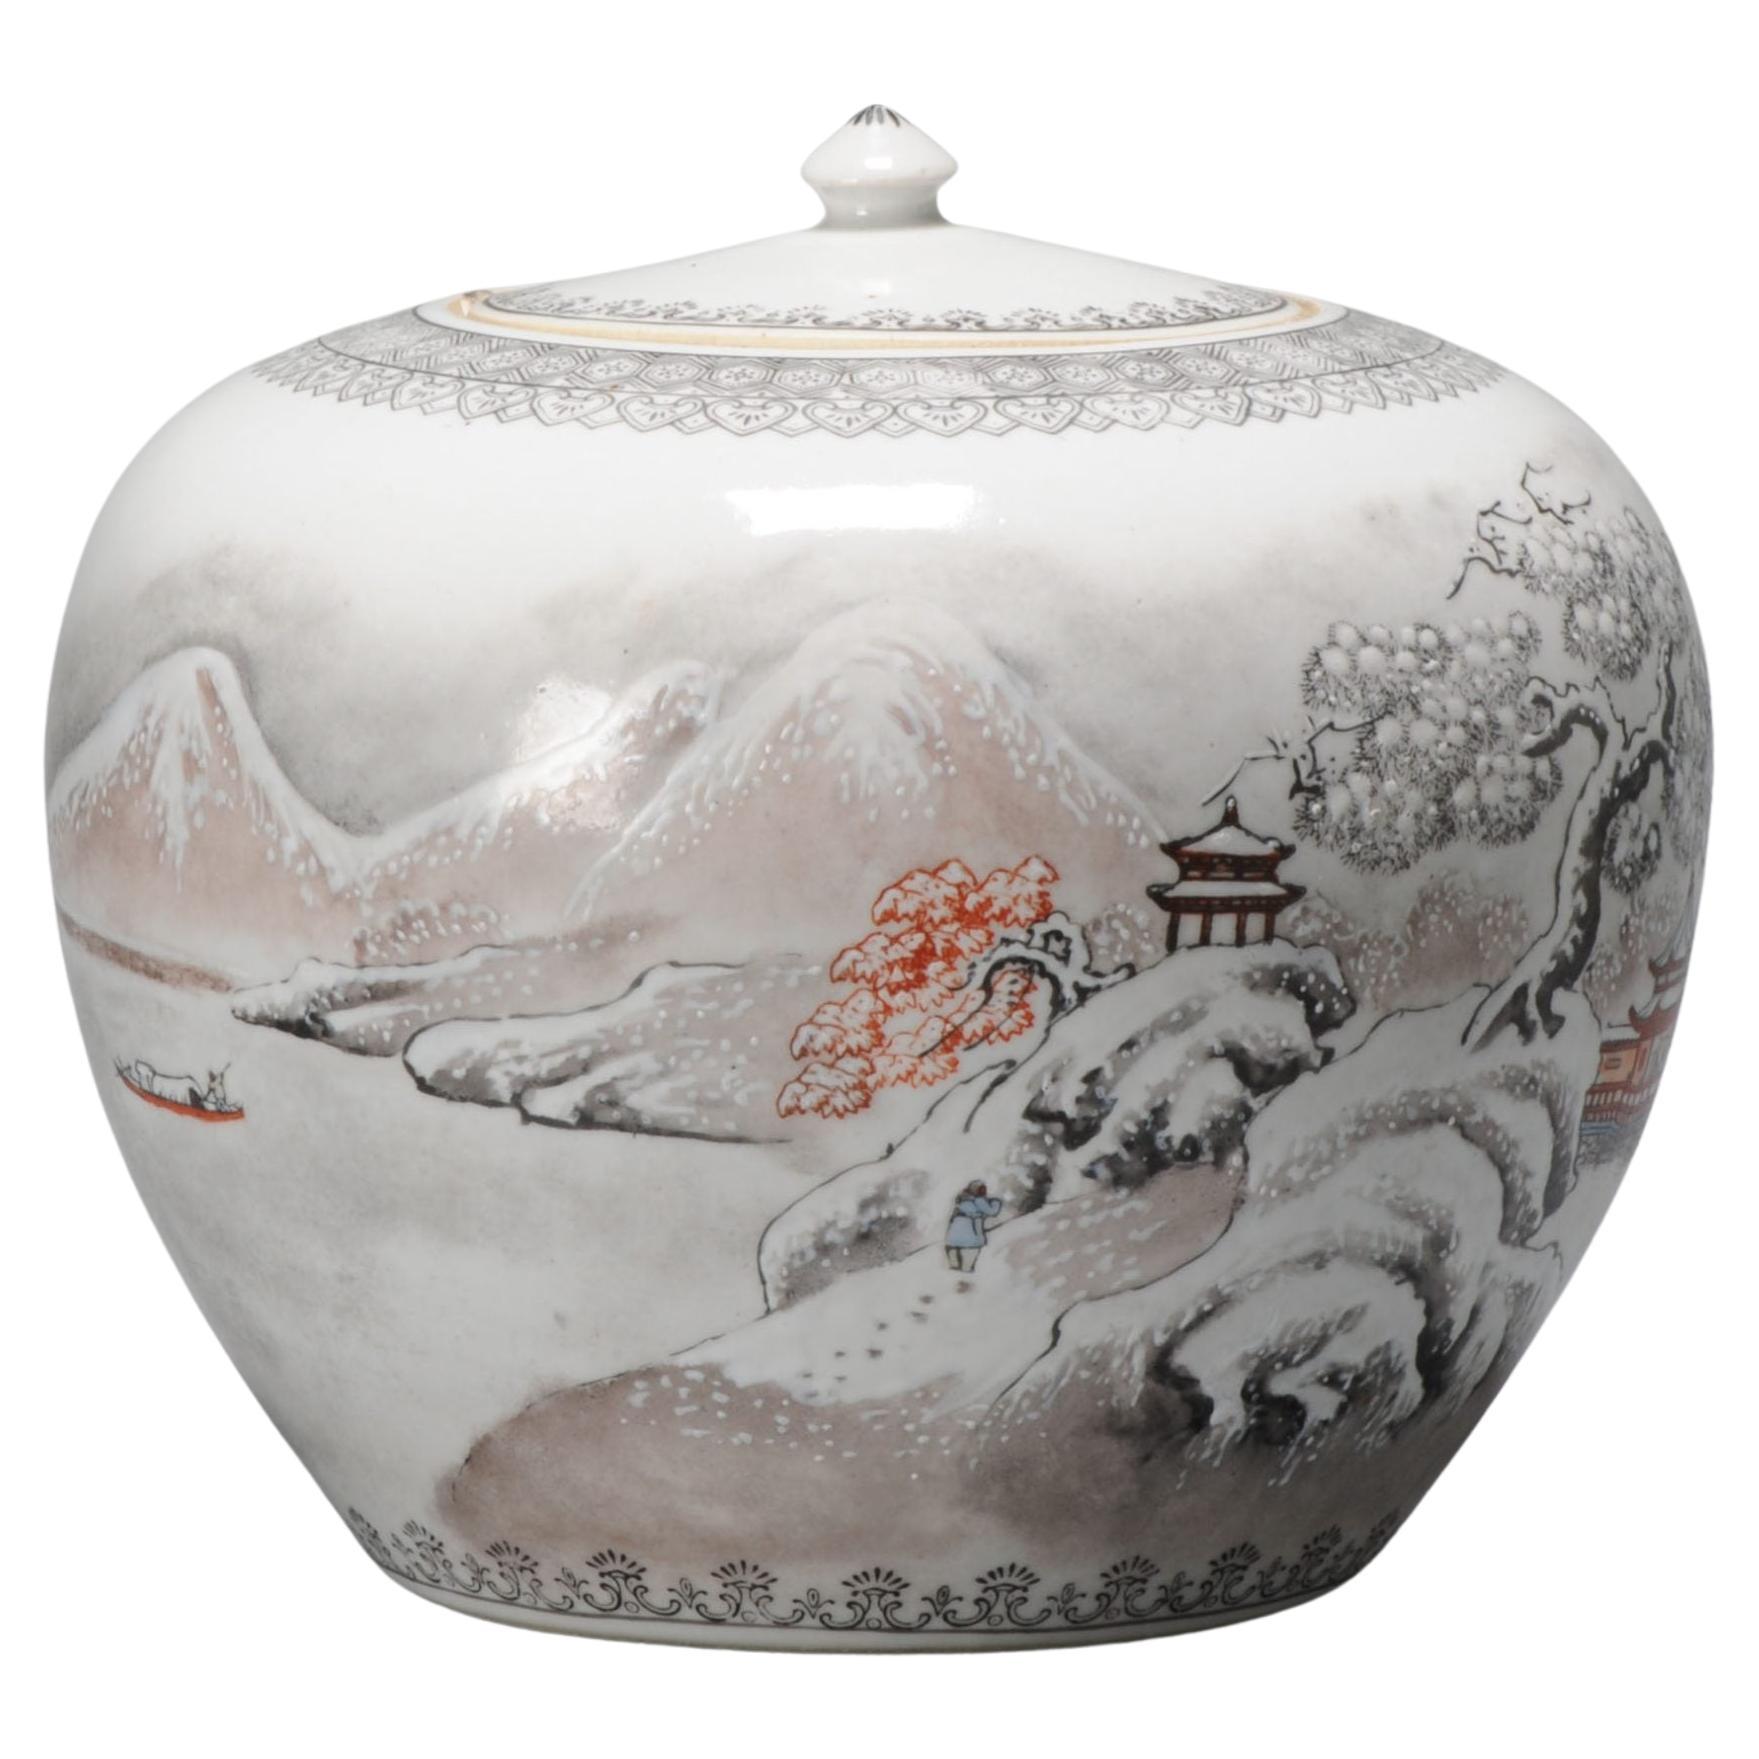 Lovley Jar in the Style of He Xuren, Dating to 1960-1970s, Very Nice Quality